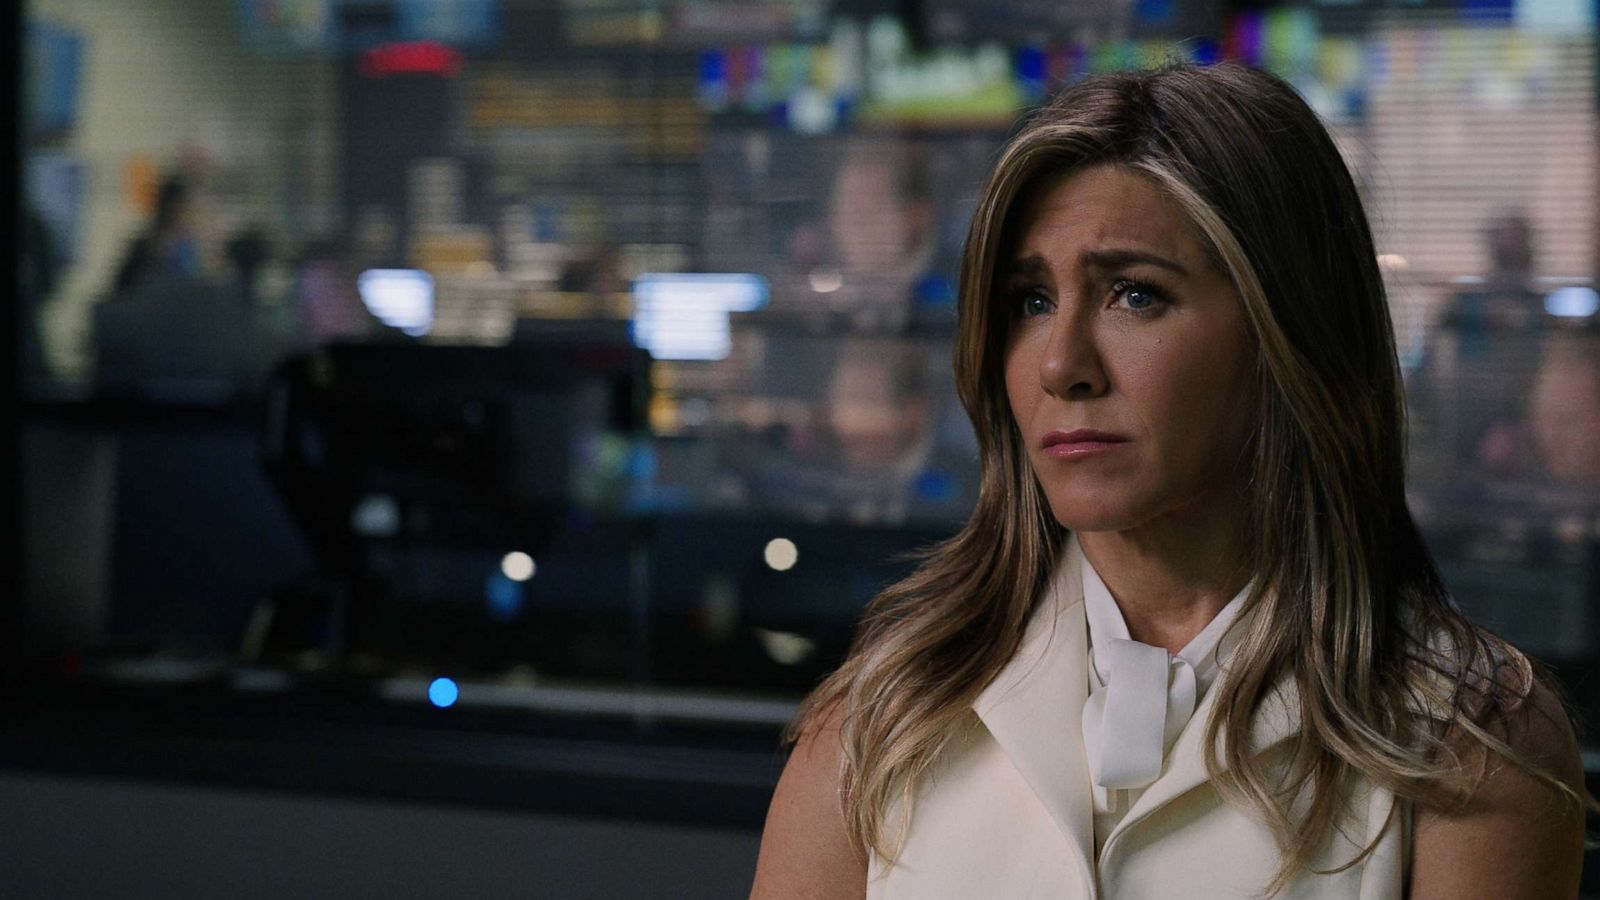 Jennifer Aniston Teases That 'The Morning Show' Season 3 Is “A